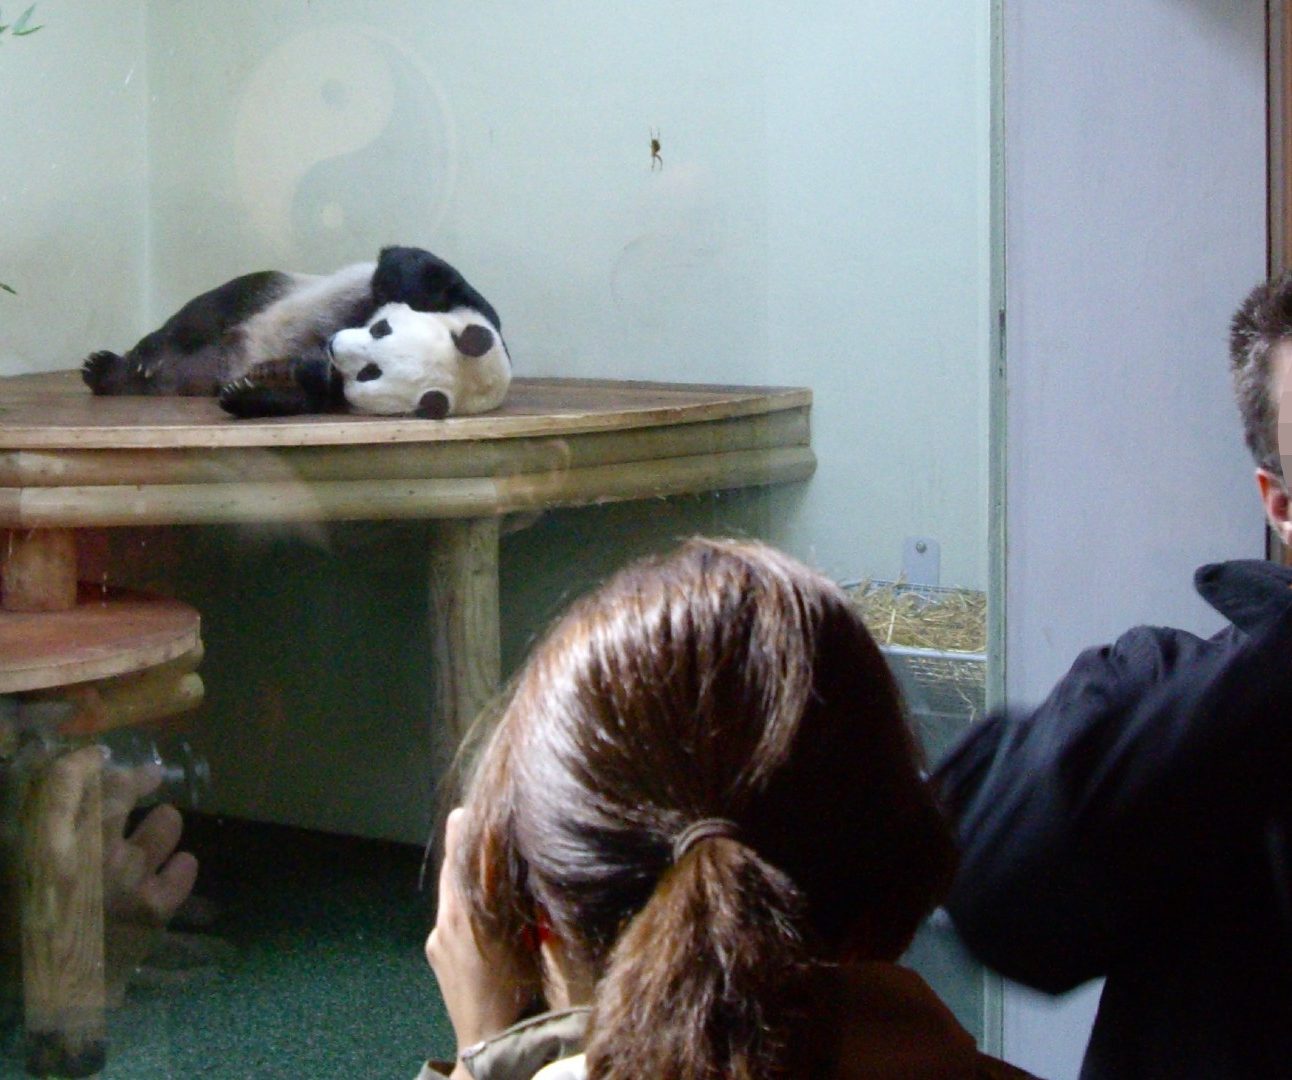 A giant panda lying down behind the glass of a zoo enclosure as people look on